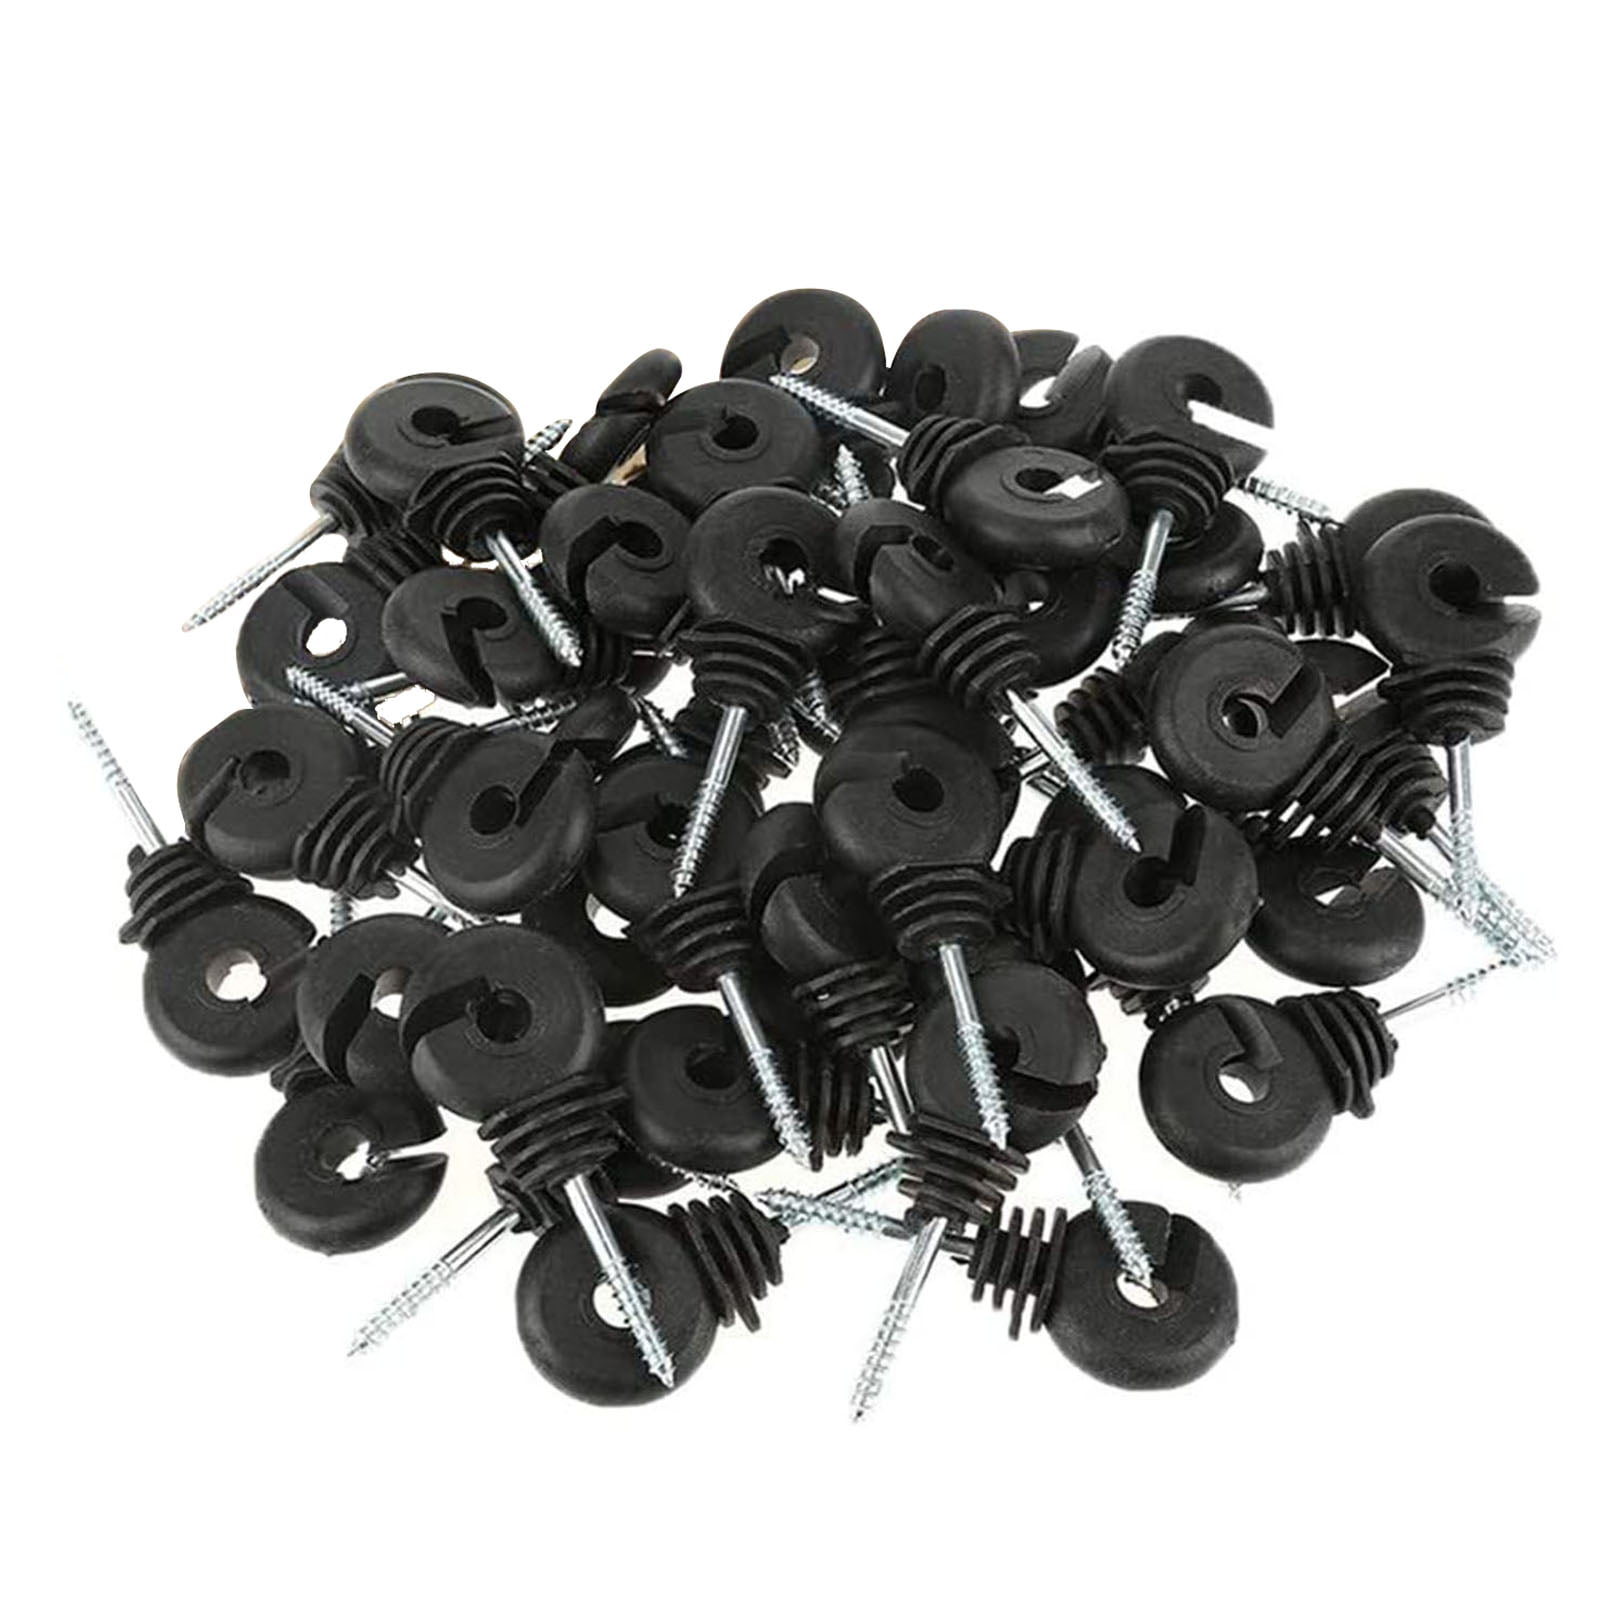 50Pcs Electric Fence Insulators Durable Fencing Screw Posts Multifunctional  Fence Insulators, Post Insulator Accessories for Animal Husbandry -  